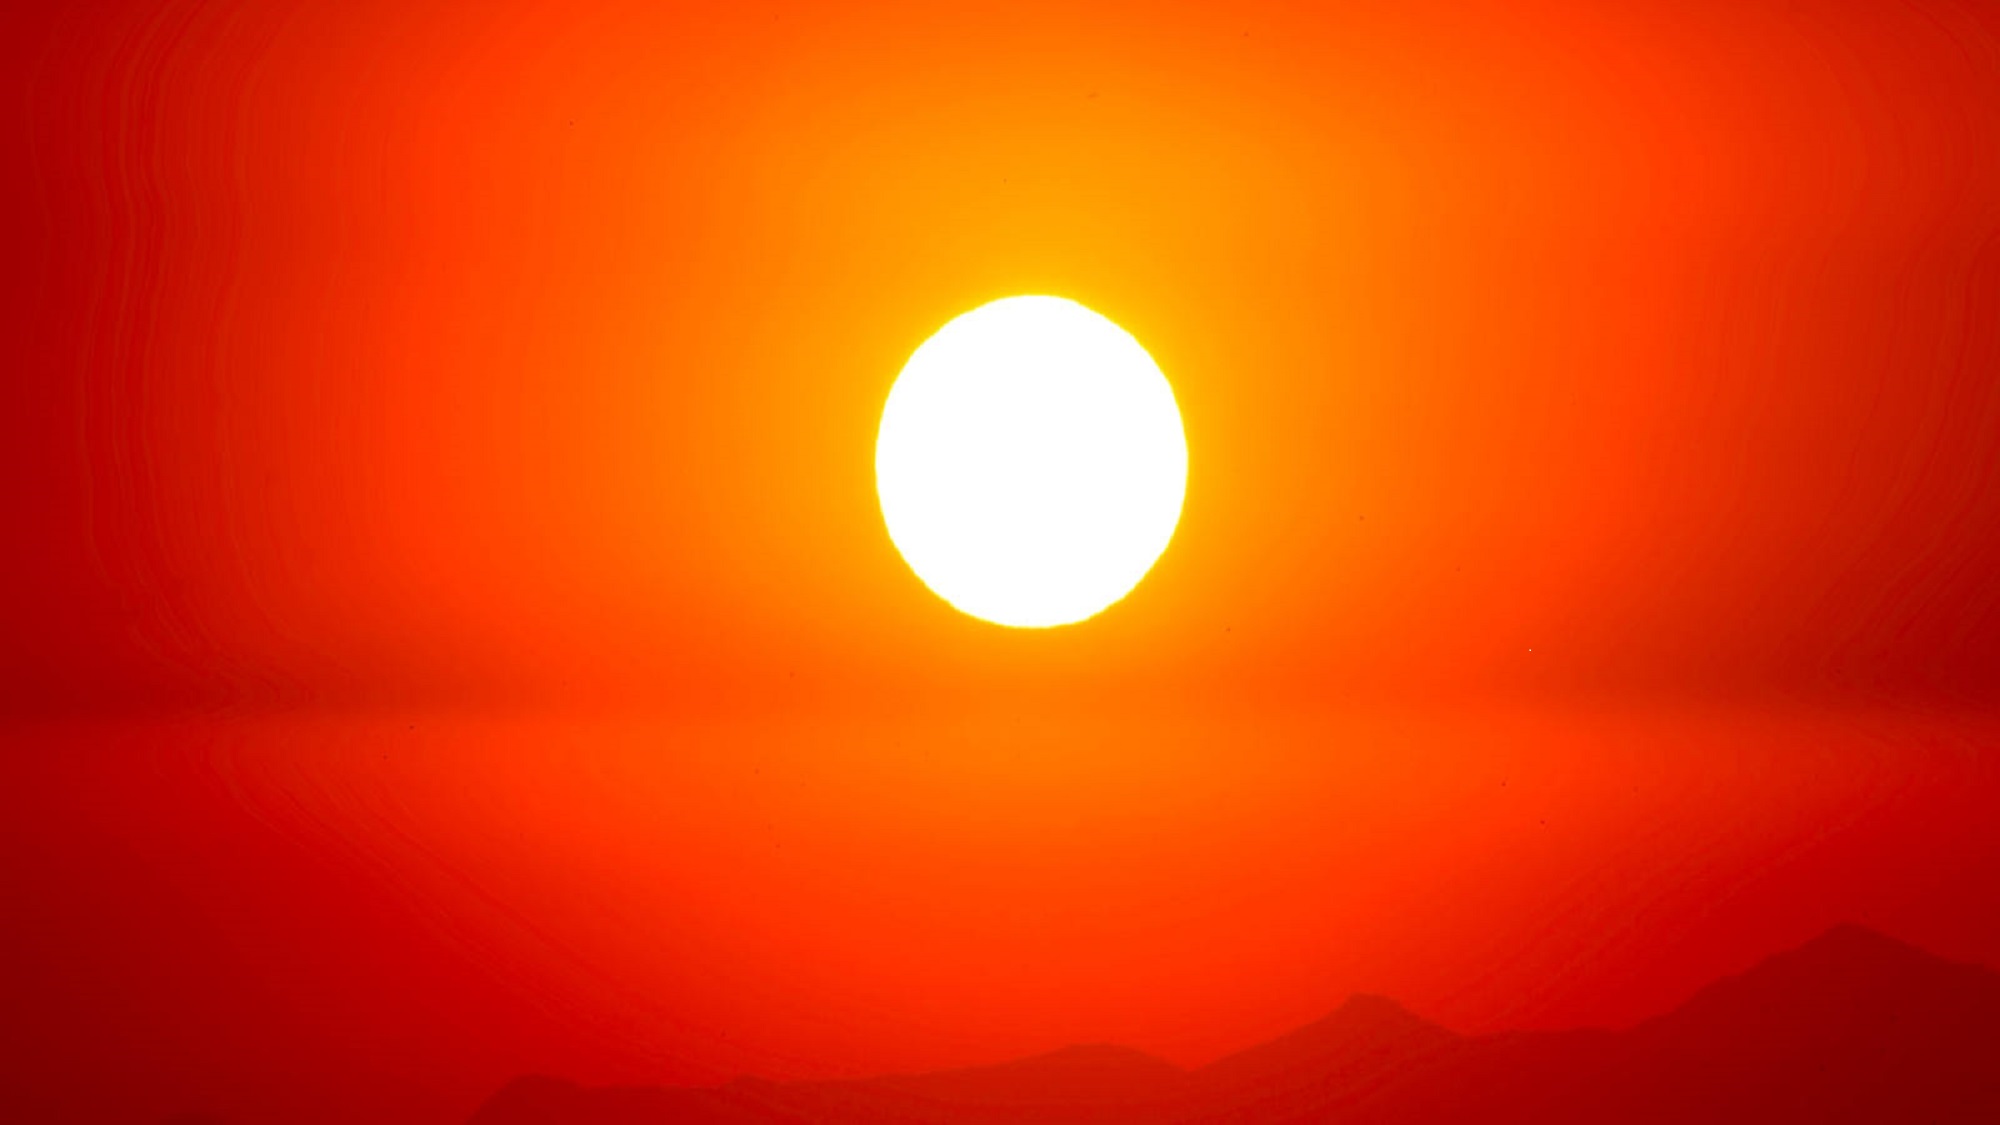 Effects of heat: ISGlobal research reveals crucial health impacts